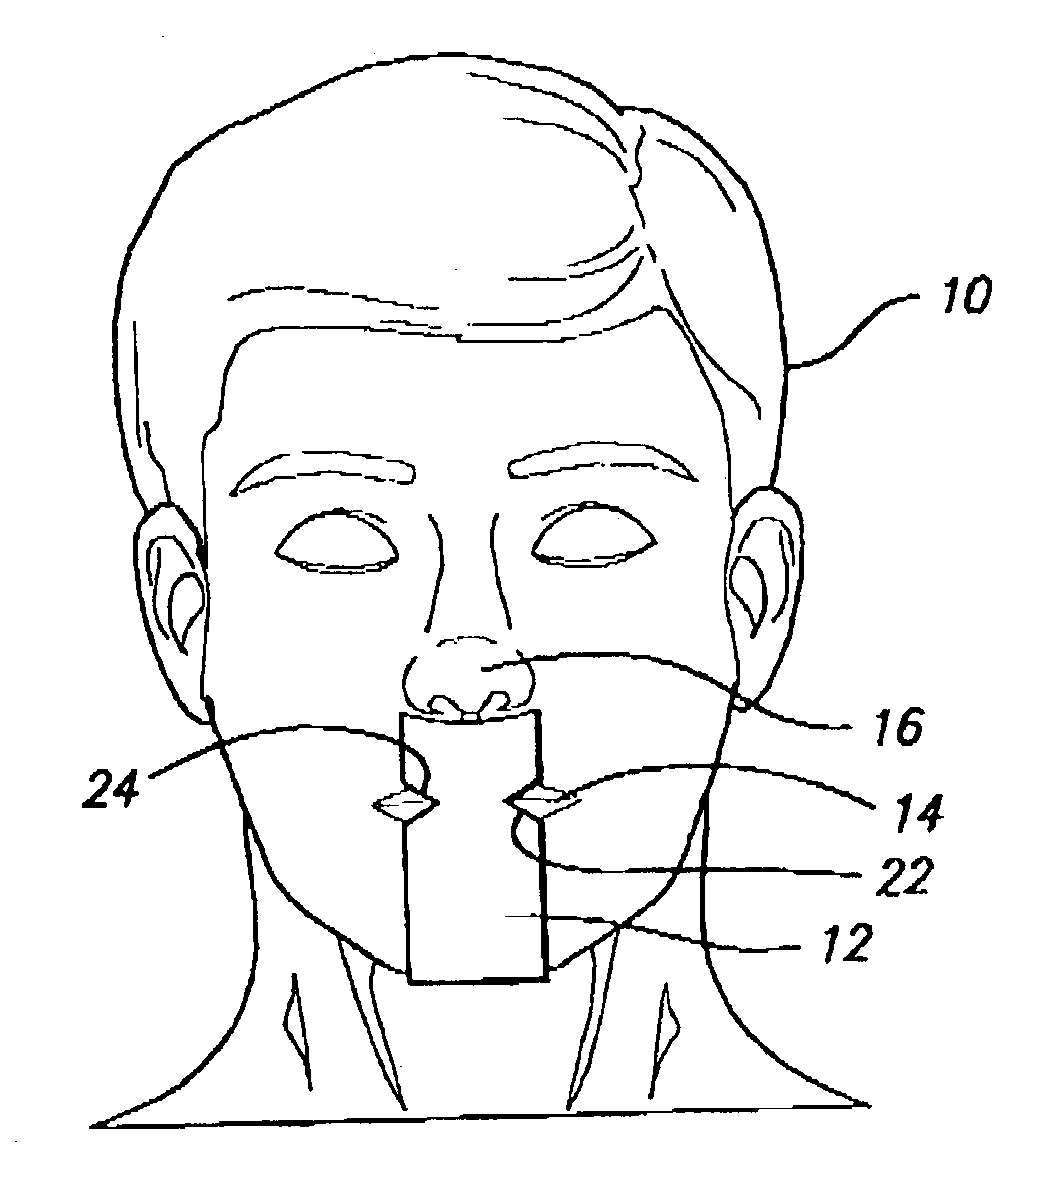 Snoreway space block with snore strips or portnoy buccal tab